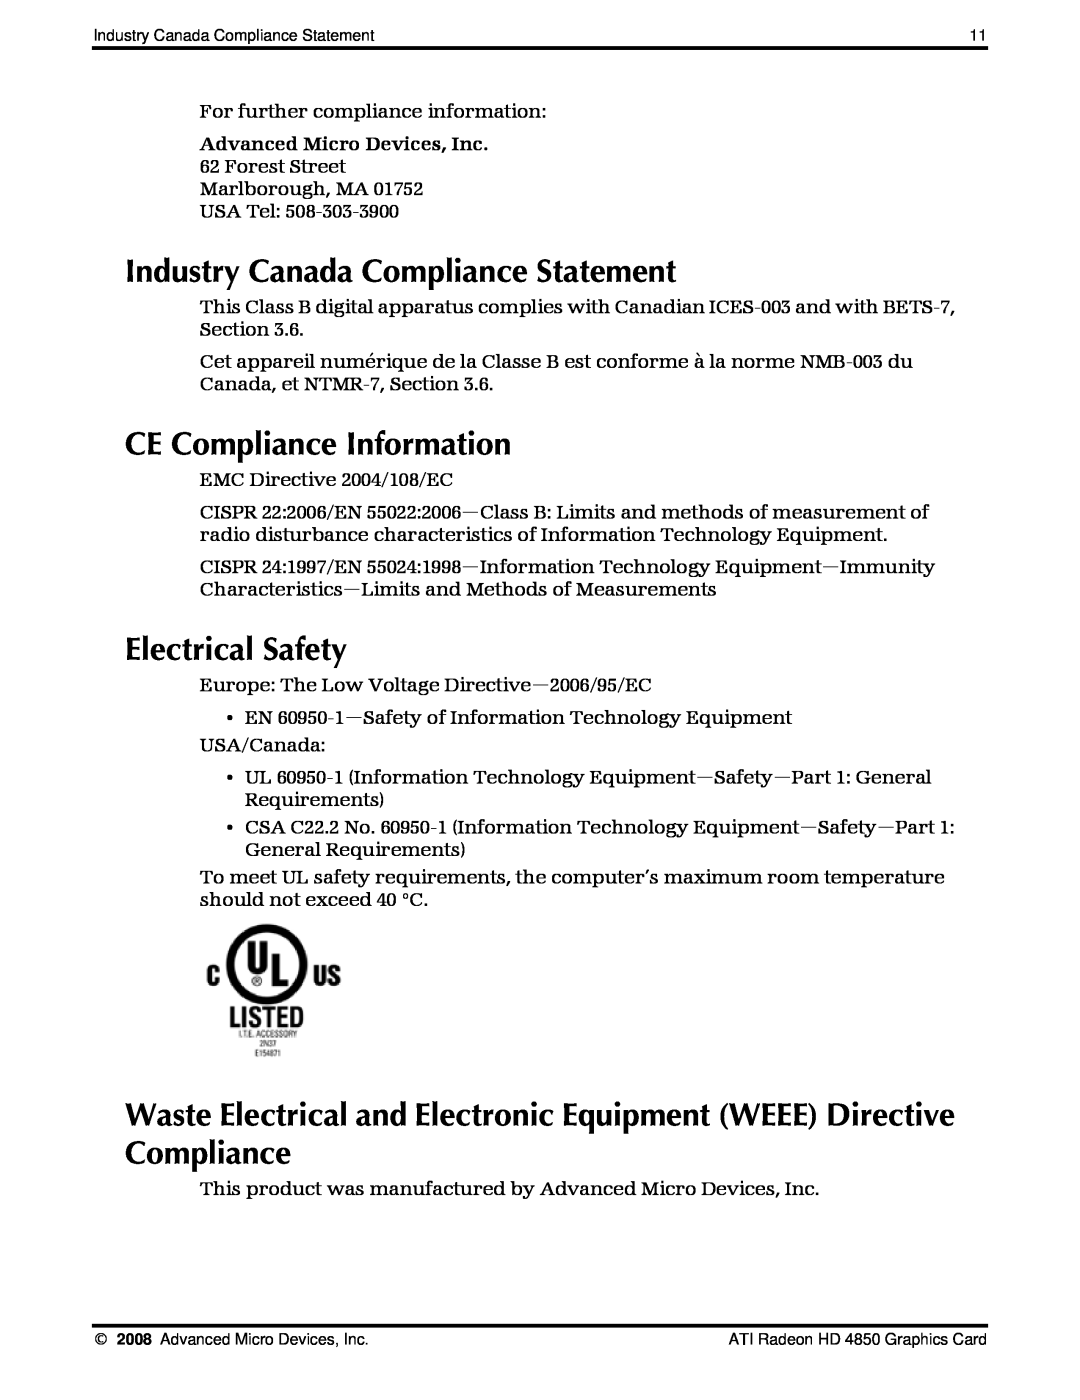 AMD 4850 Industry Canada Compliance Statement, CE Compliance Information, Electrical Safety, Advanced Micro Devices, Inc 